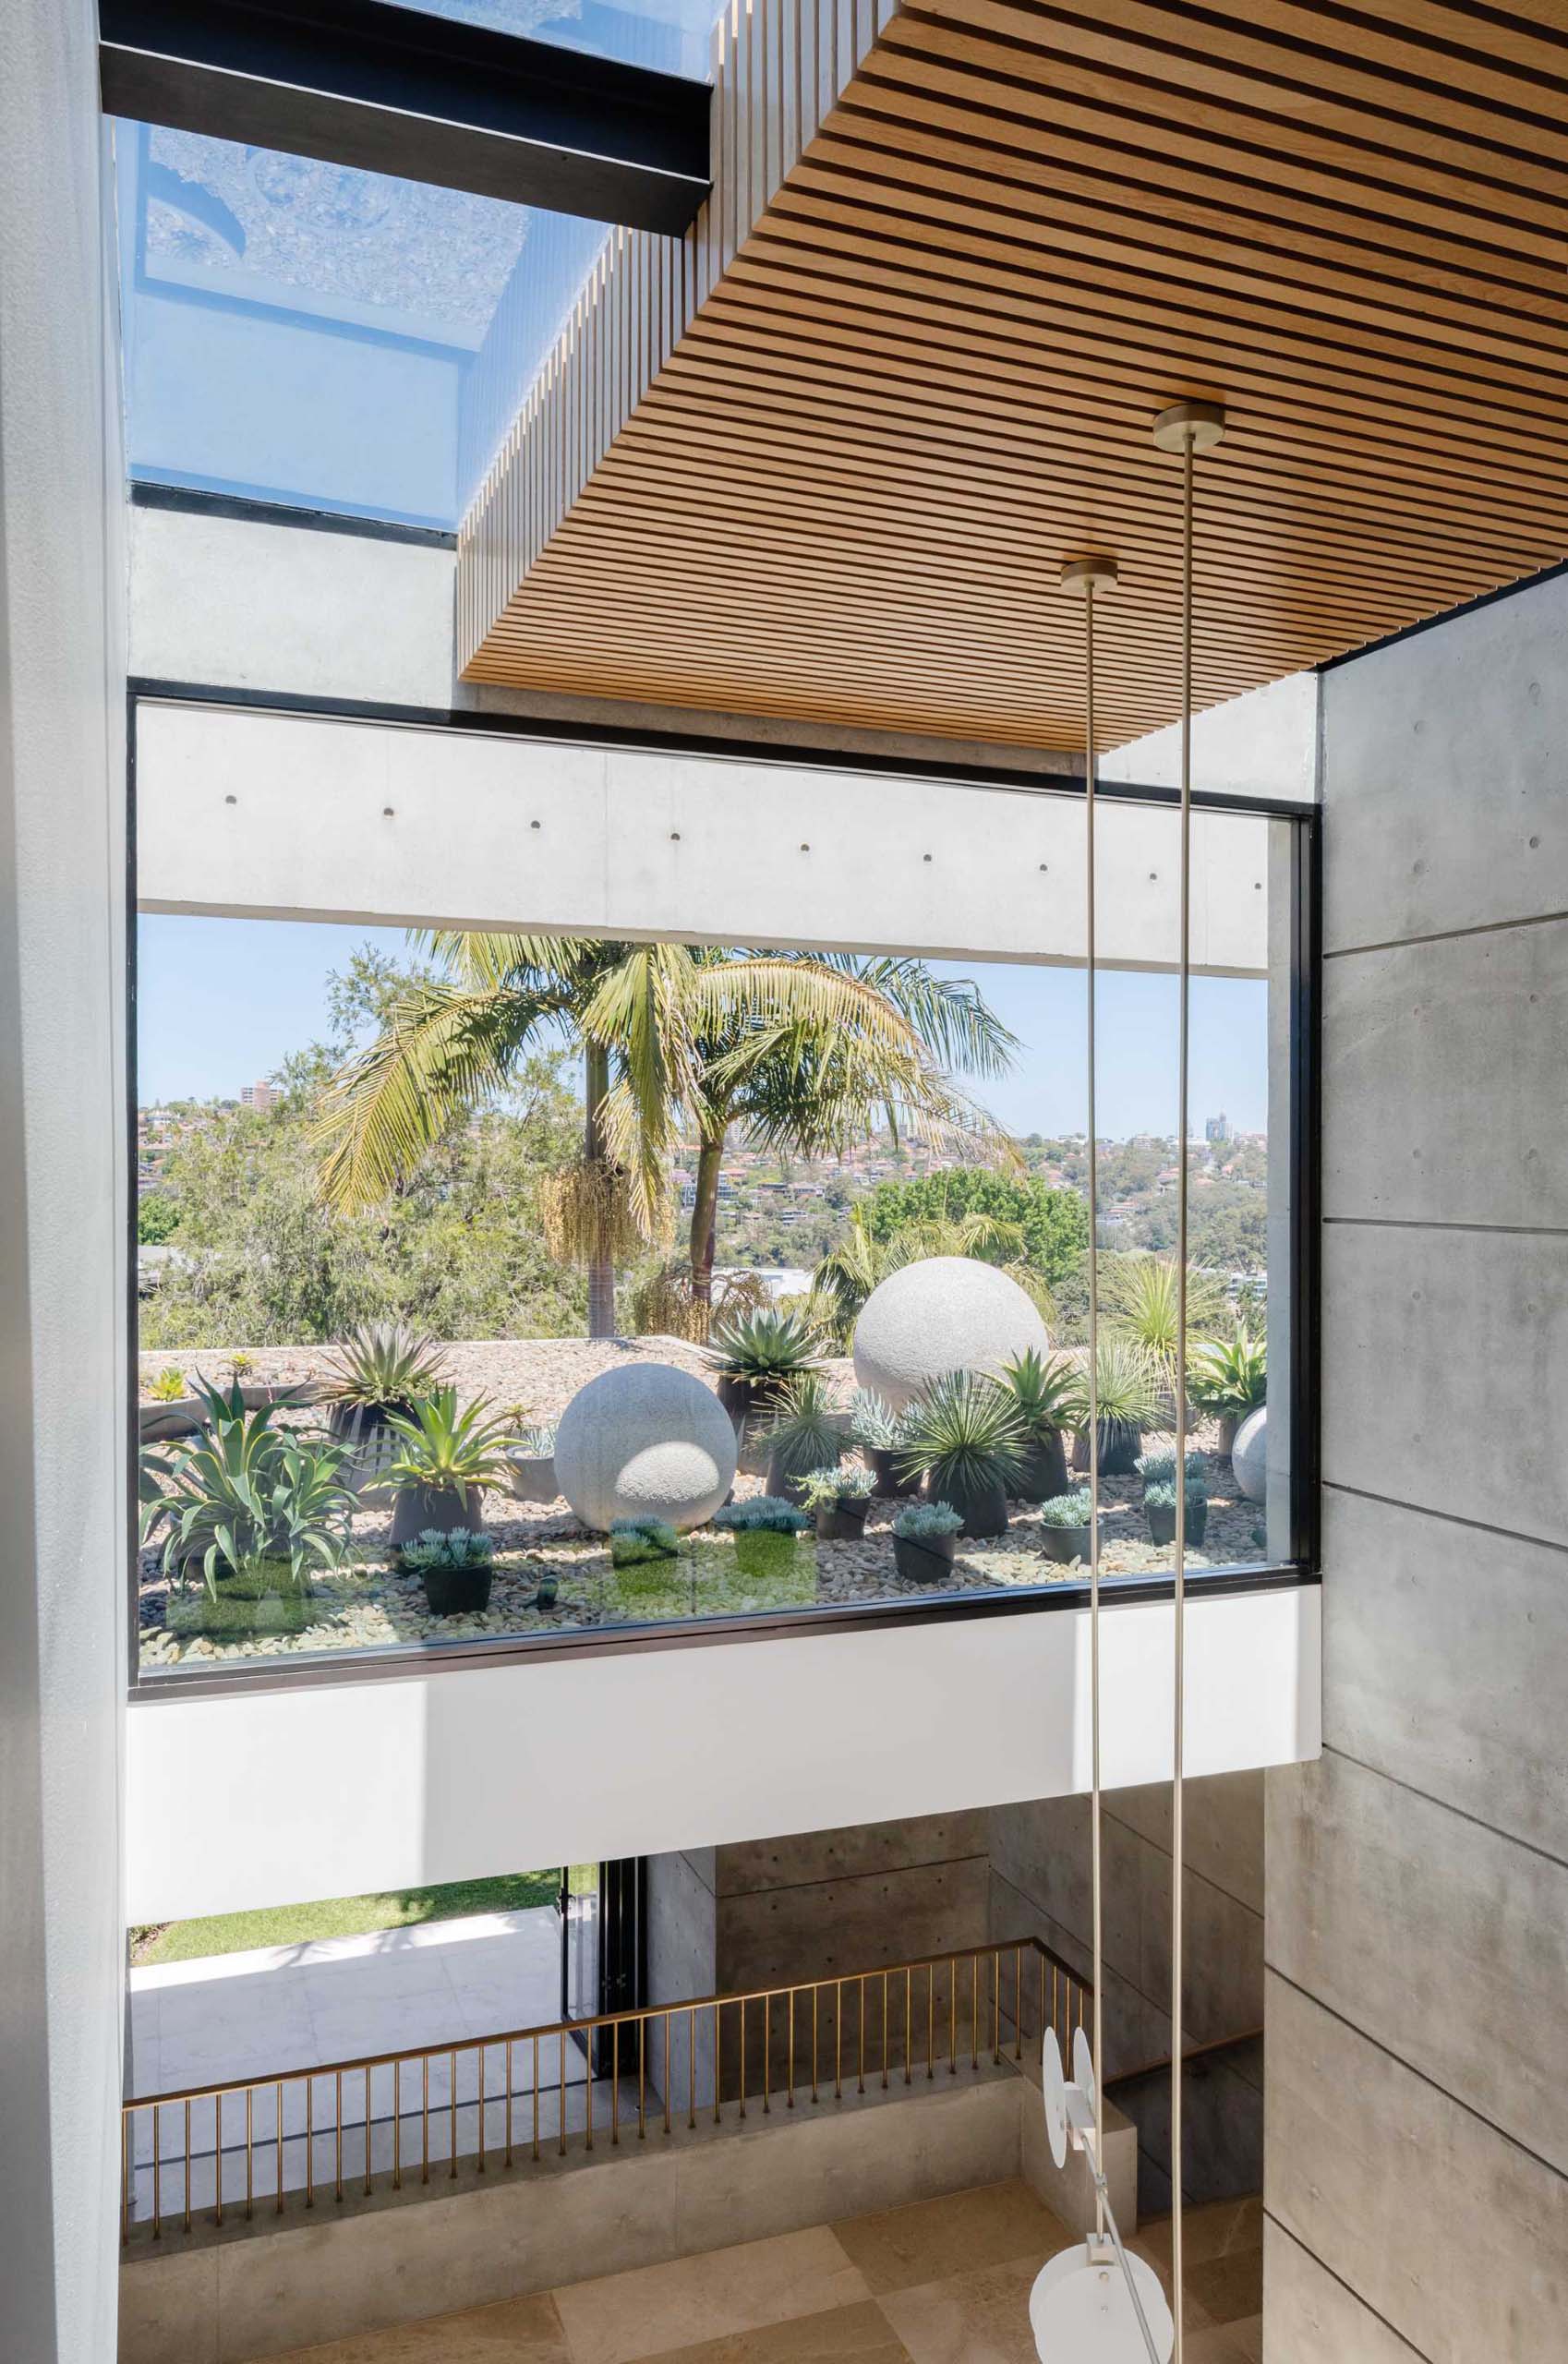 A large picture window, as well as skylights, ensure ample natural light filters through to the interior of this modern home, and allows for views of the succulent filled planters positioned on the roof of the lower level.